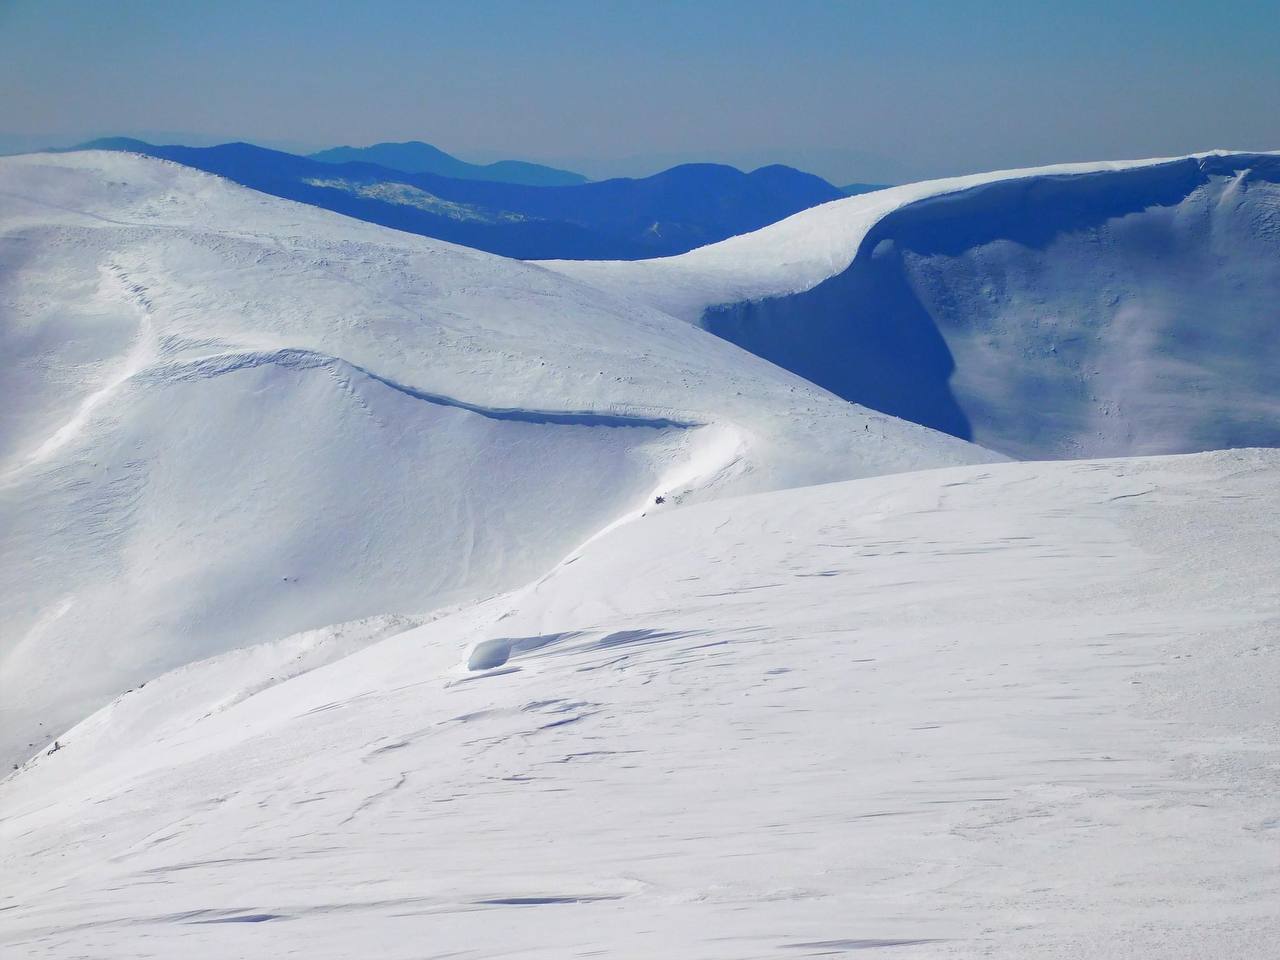 What the Chornohora ridge looks like in March 2023